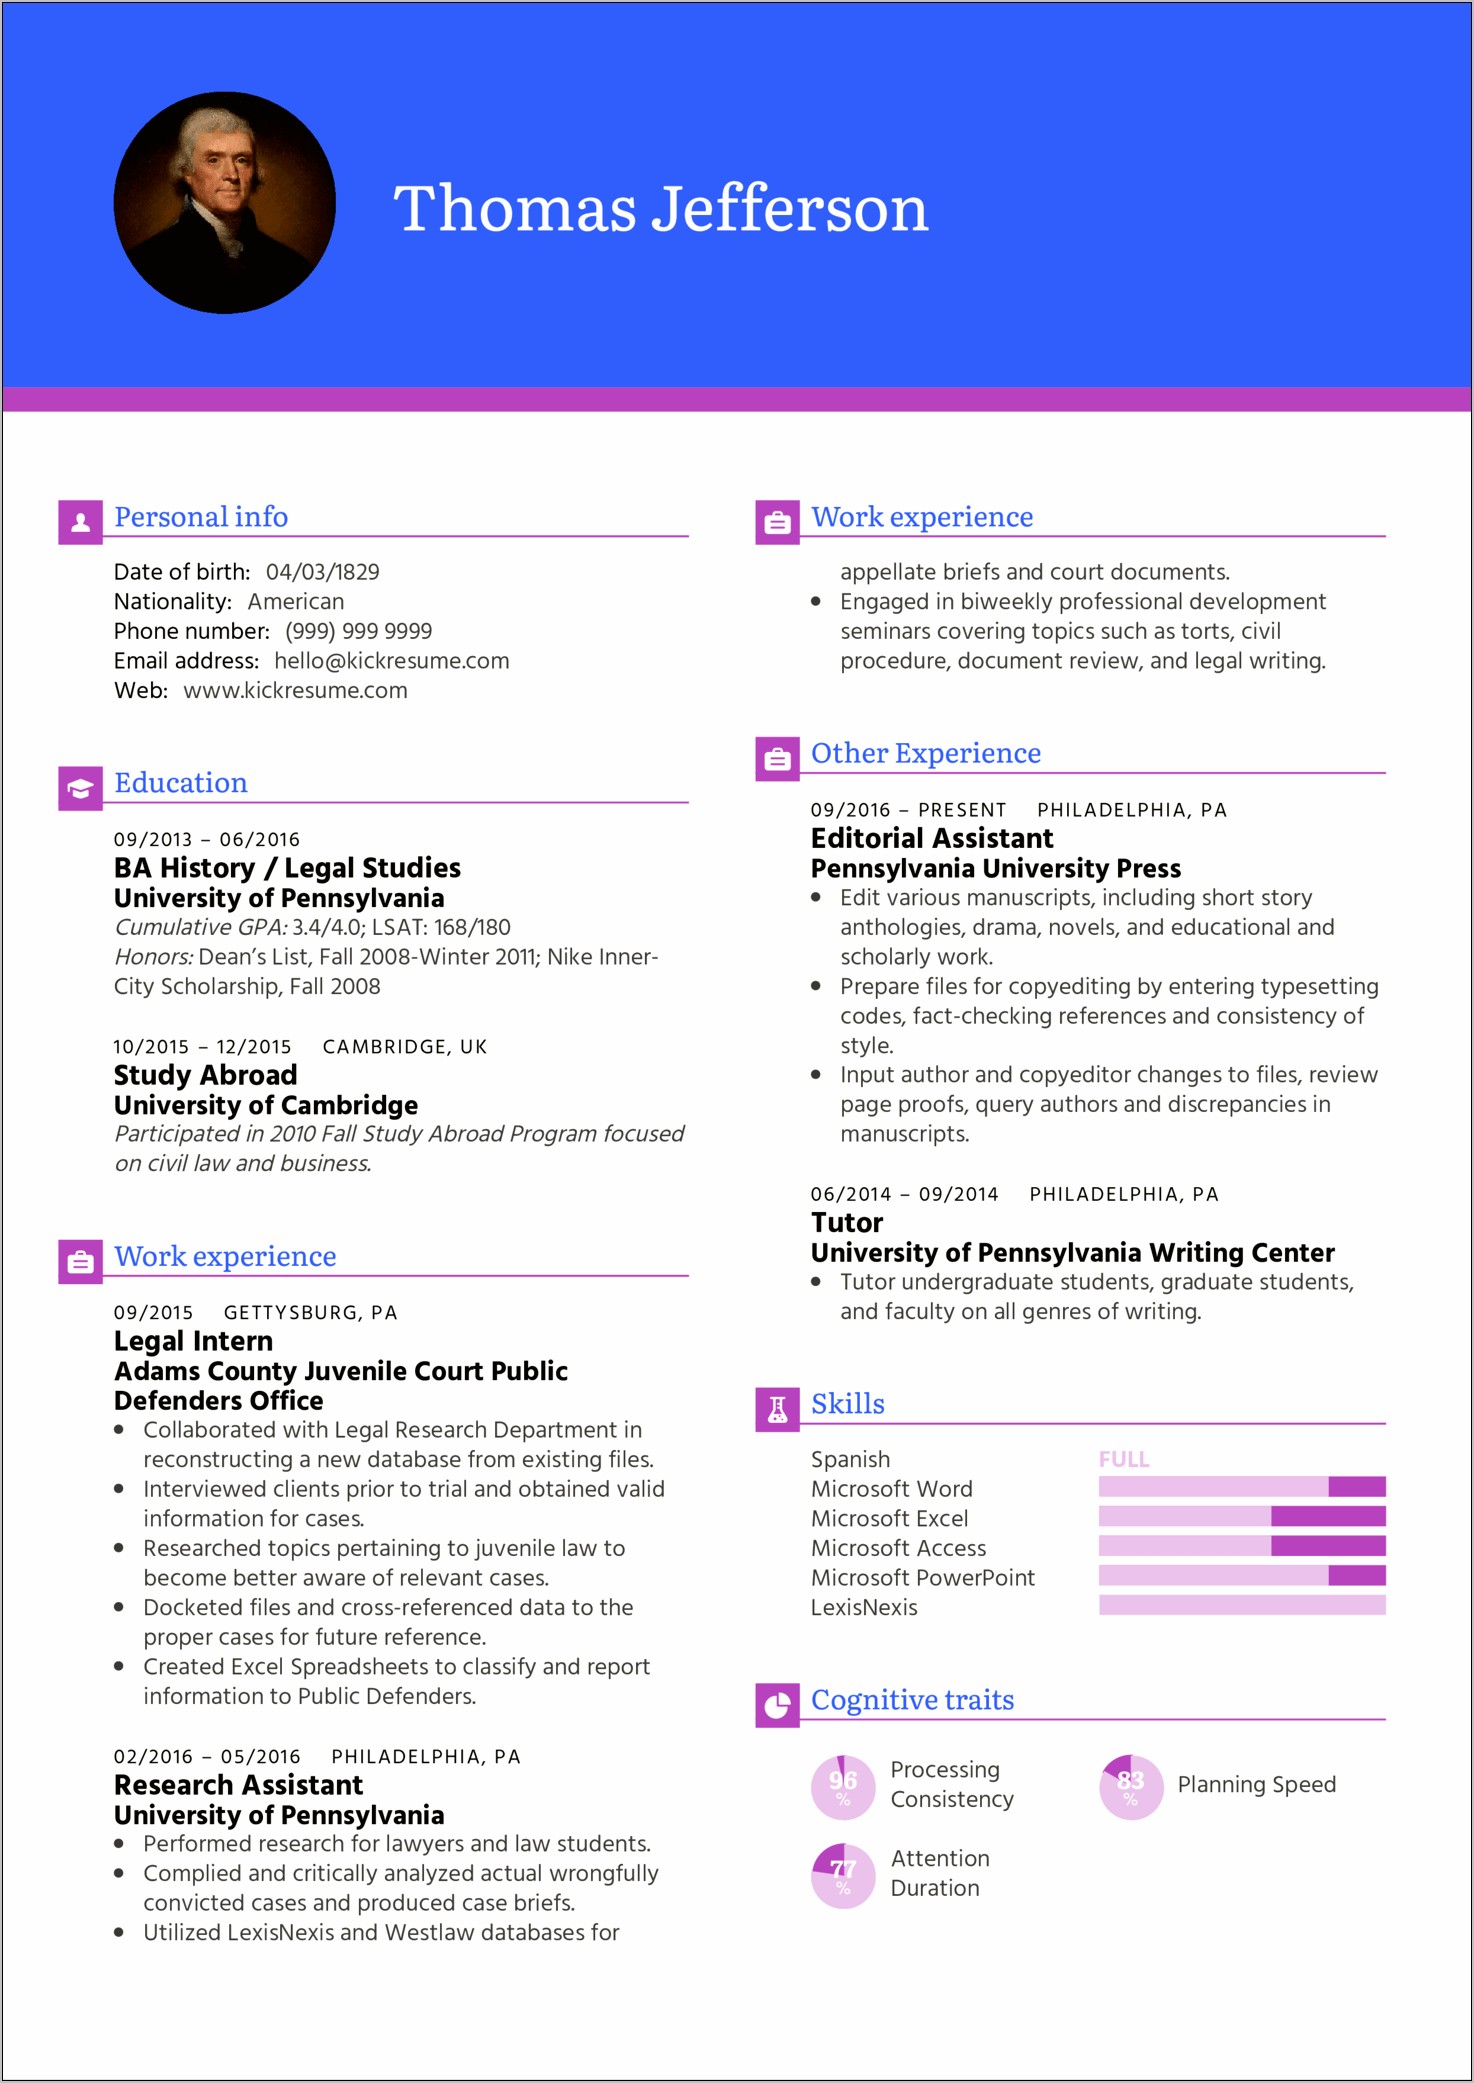 Resume Samples For Law Graduates